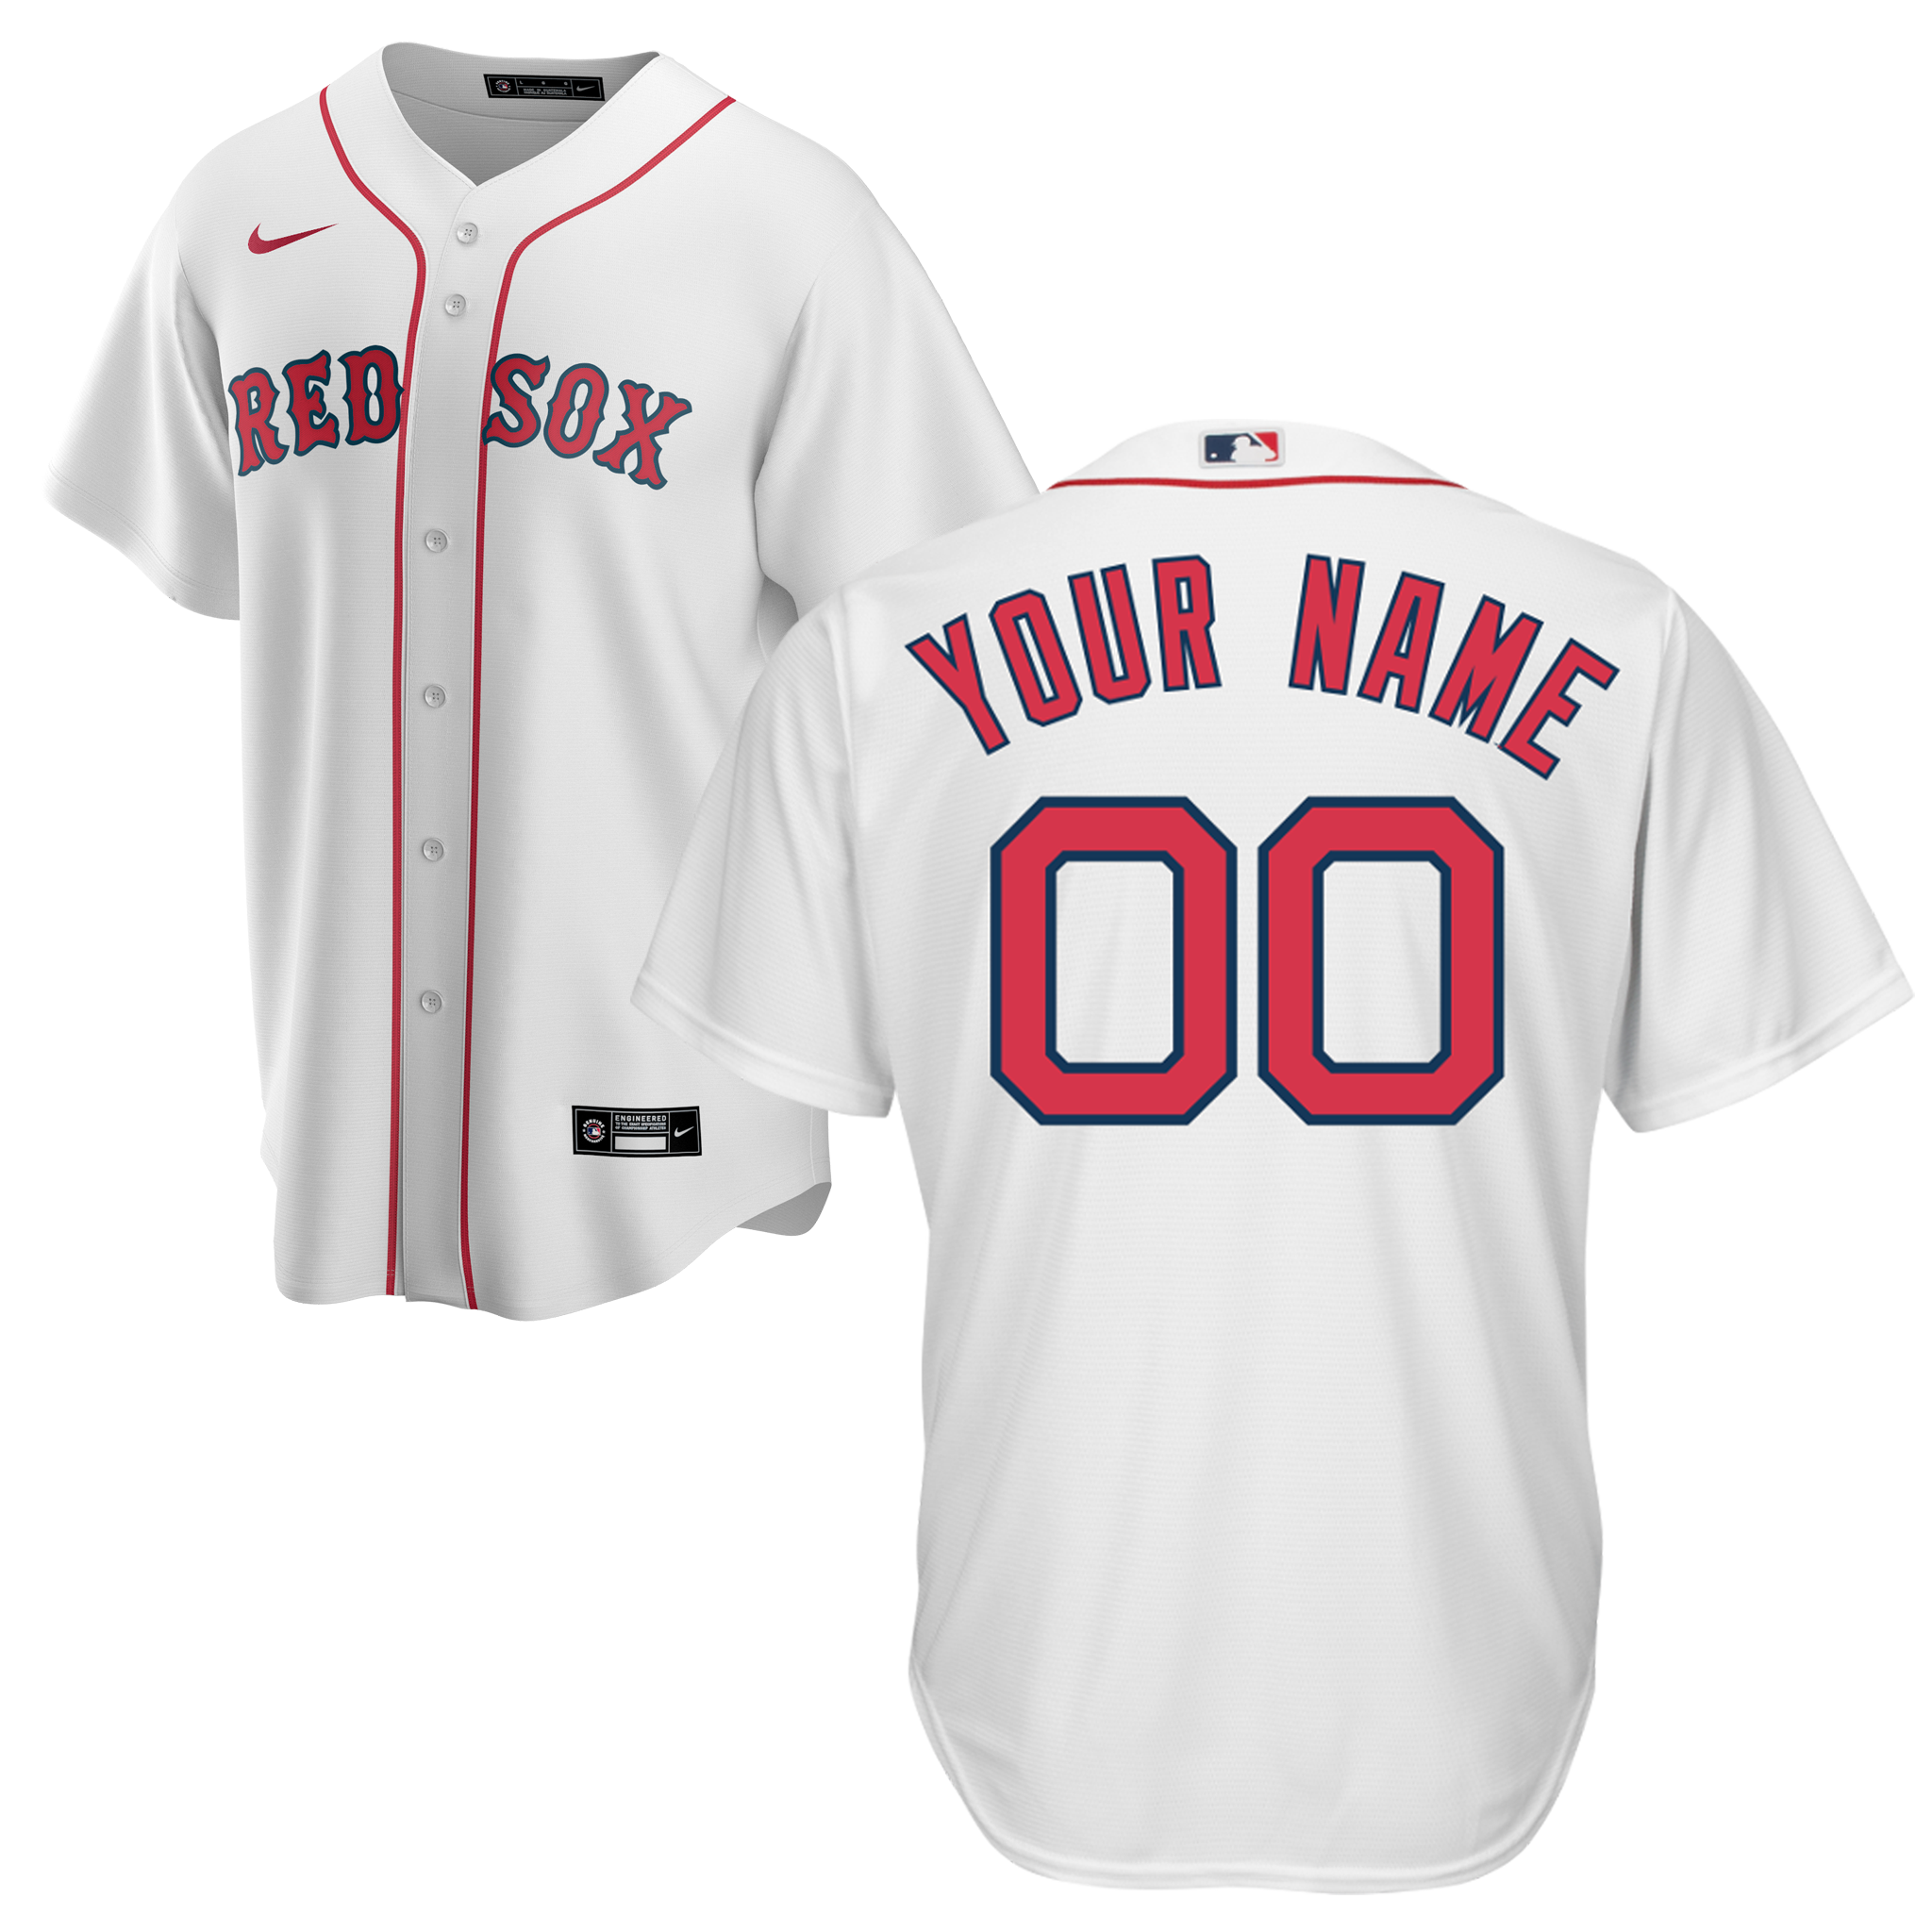 Lulu Grace Designs Boston Red Sox Inspired Baseball Jersey Navy: Baseball Fan Gear & Apparel for Women and Kids Youth/Toddler Tee / M